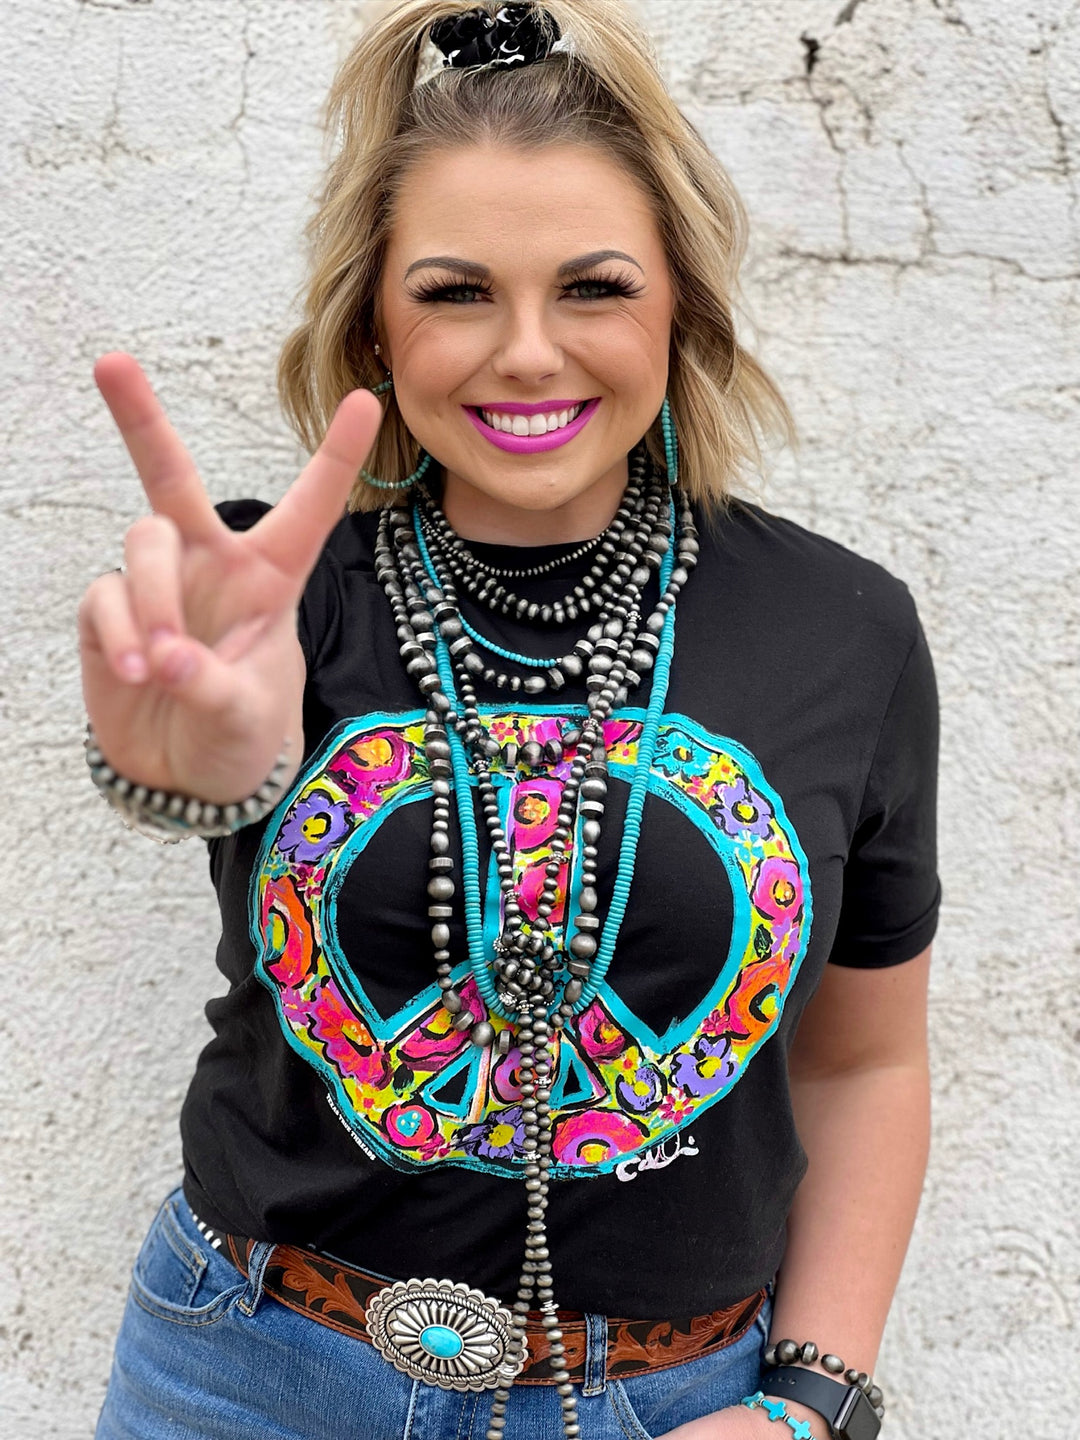 Callie's Peace Sign Black Graphic Tee by Texas True Threads